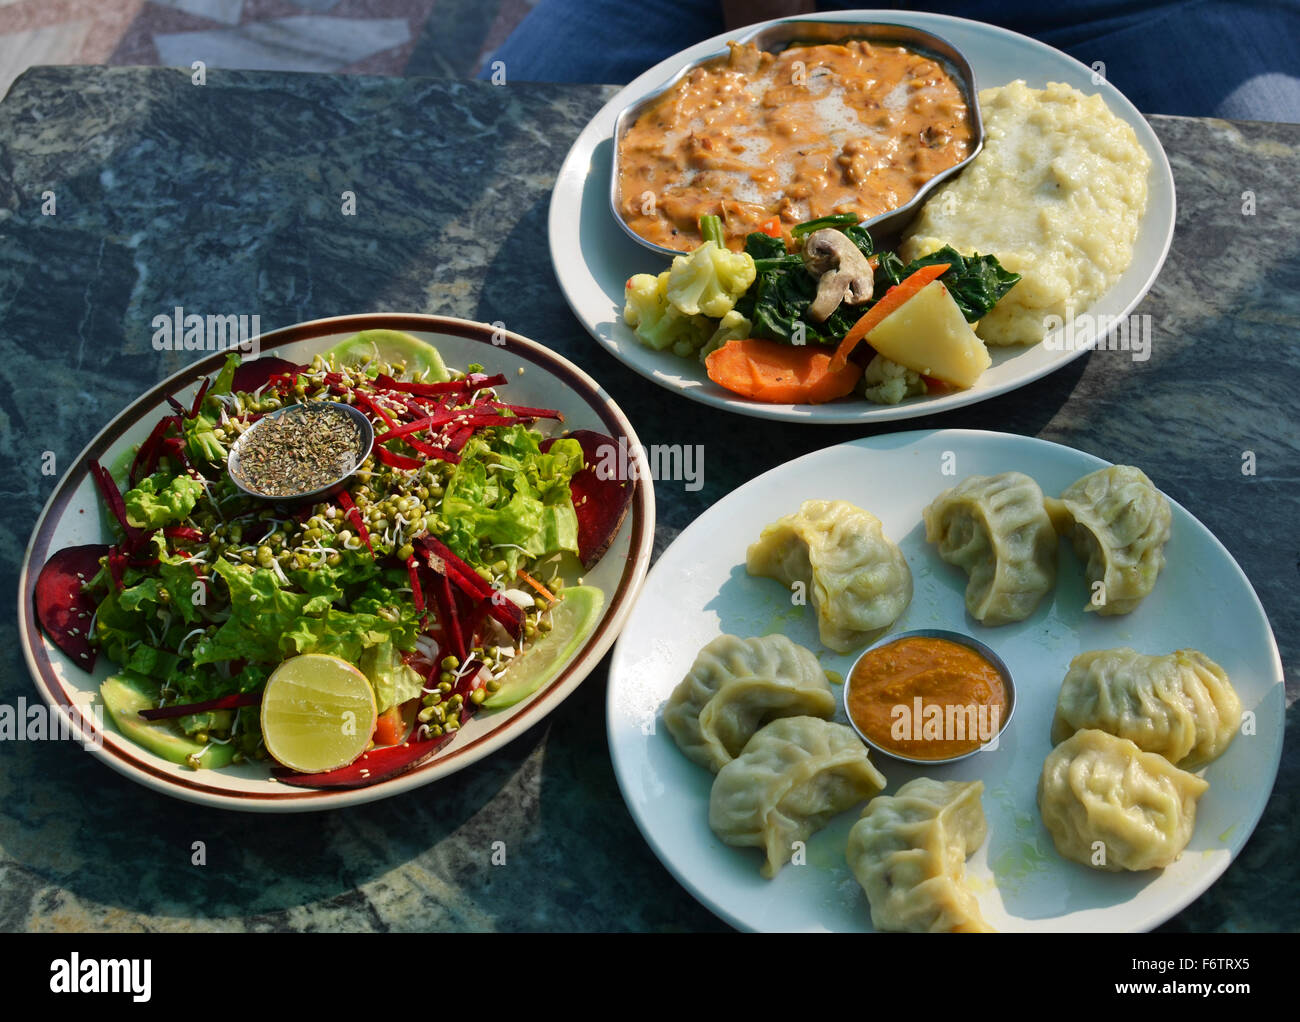 lunch Indian a national dish, food Stock Photo